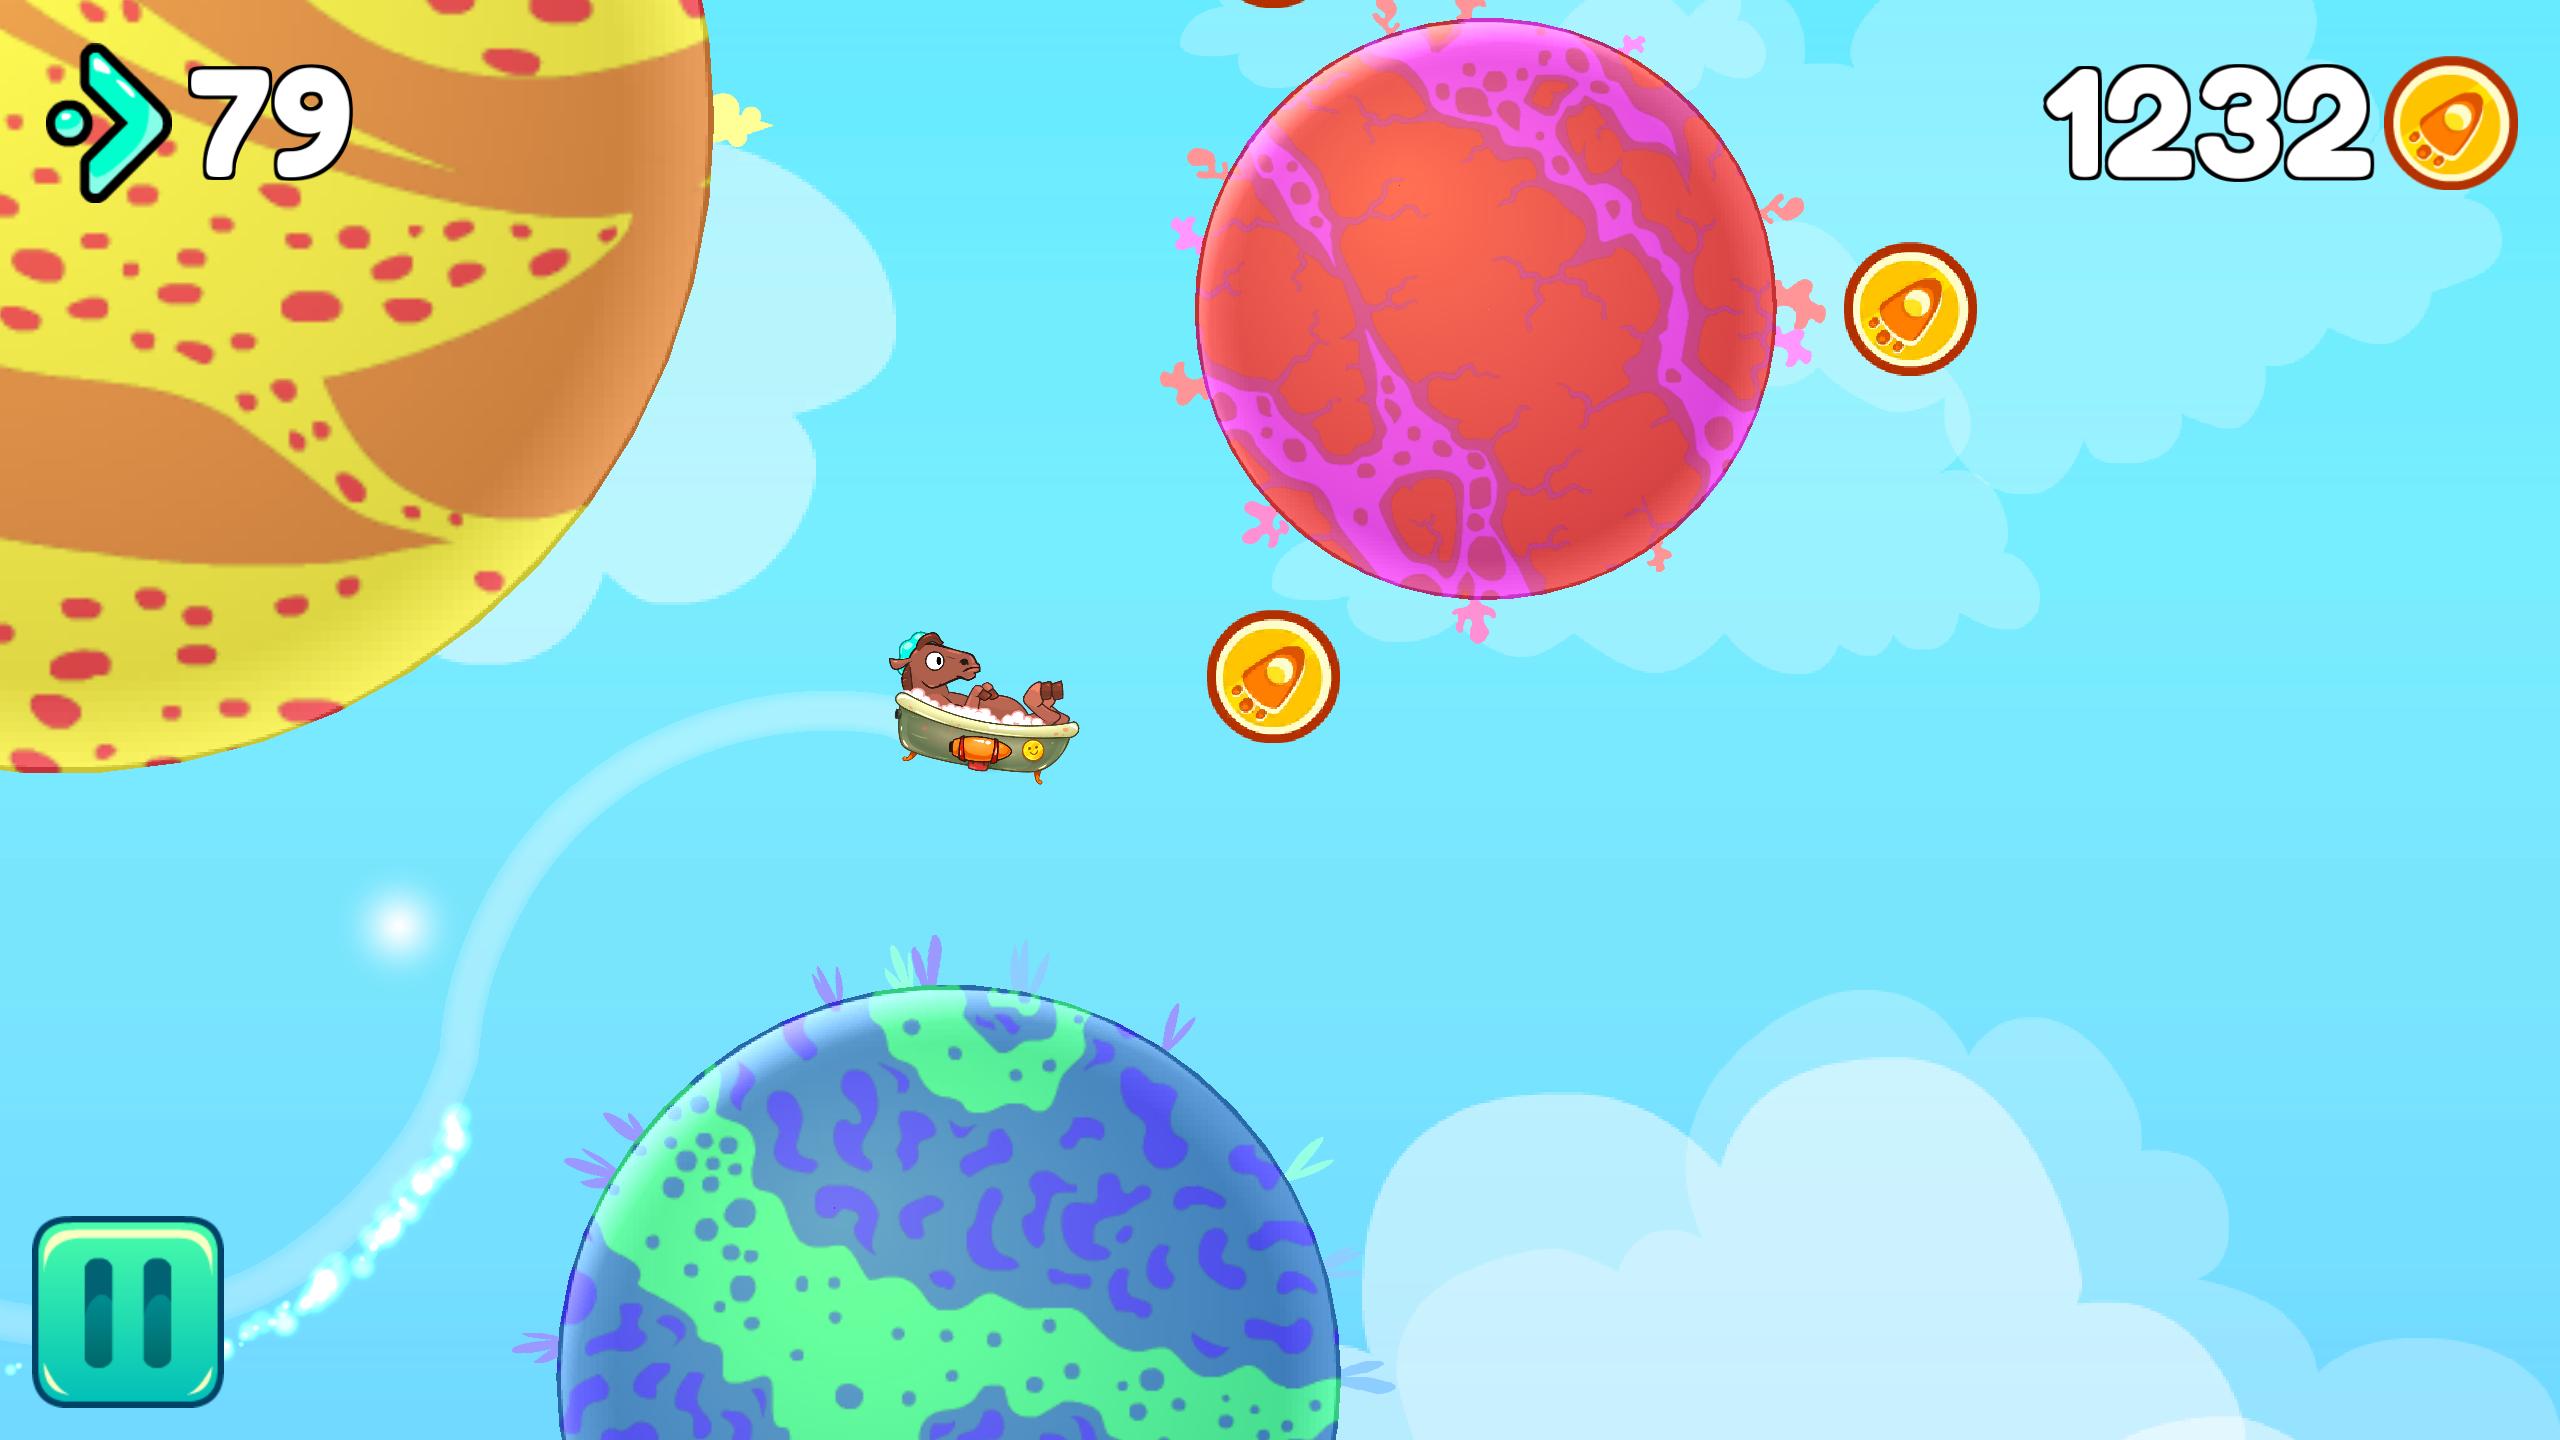 Fly download. Игра Флай. Fly Fly игра. Fly game Android. Игра веселый полет.